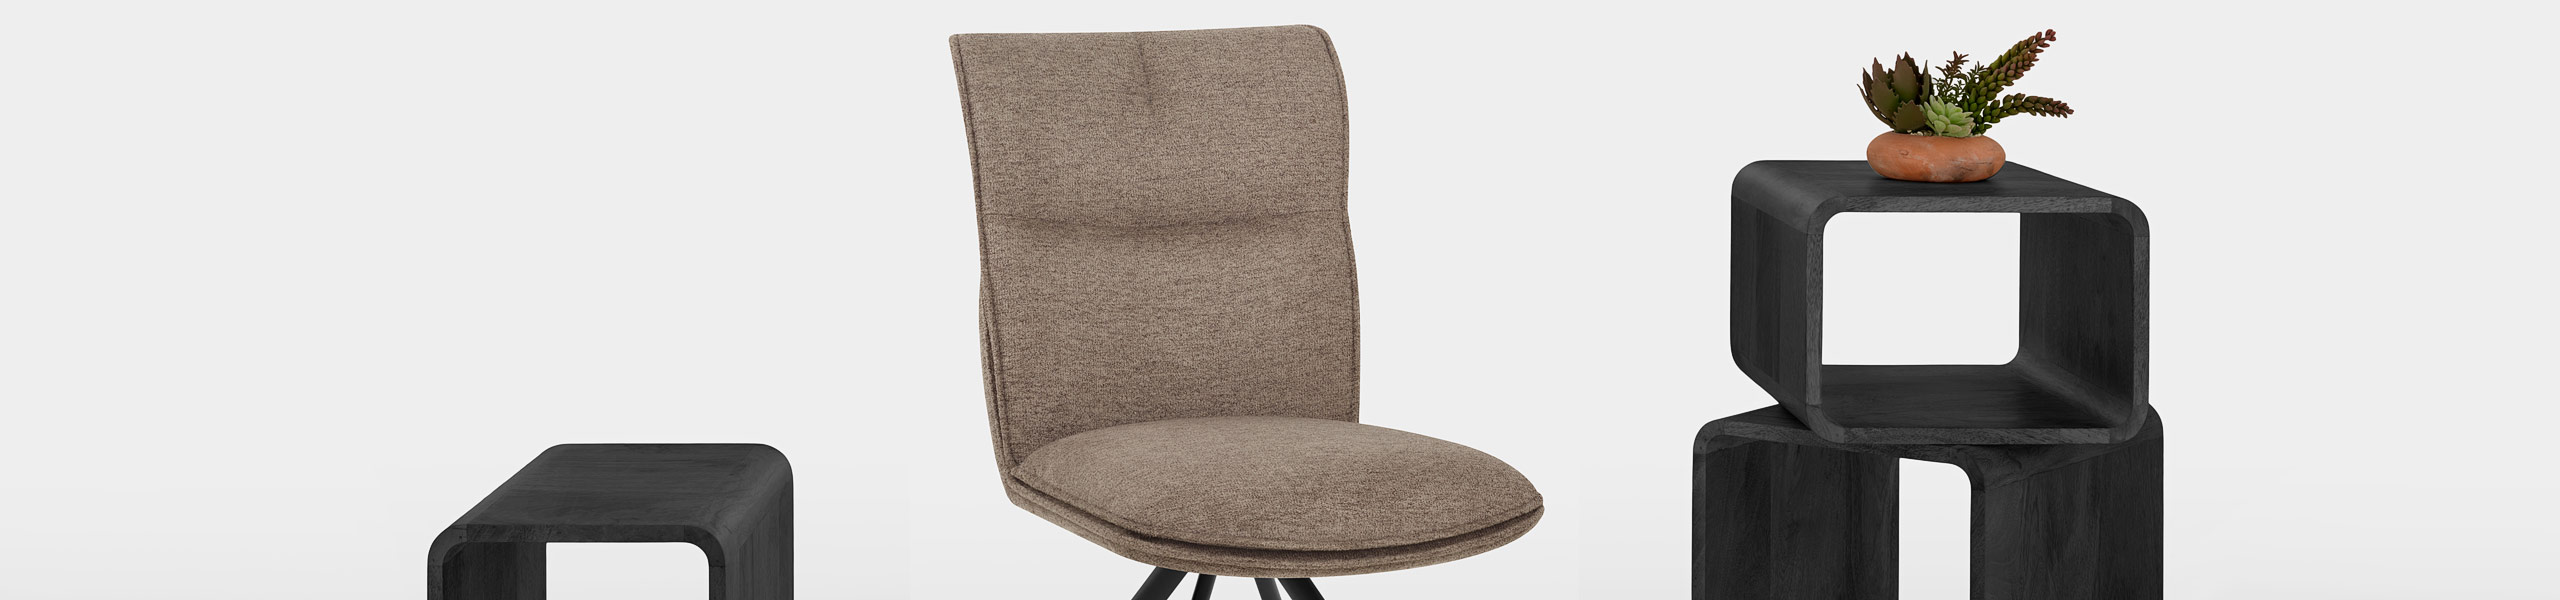 Cody Dining Chair Brown Fabric Video Banner